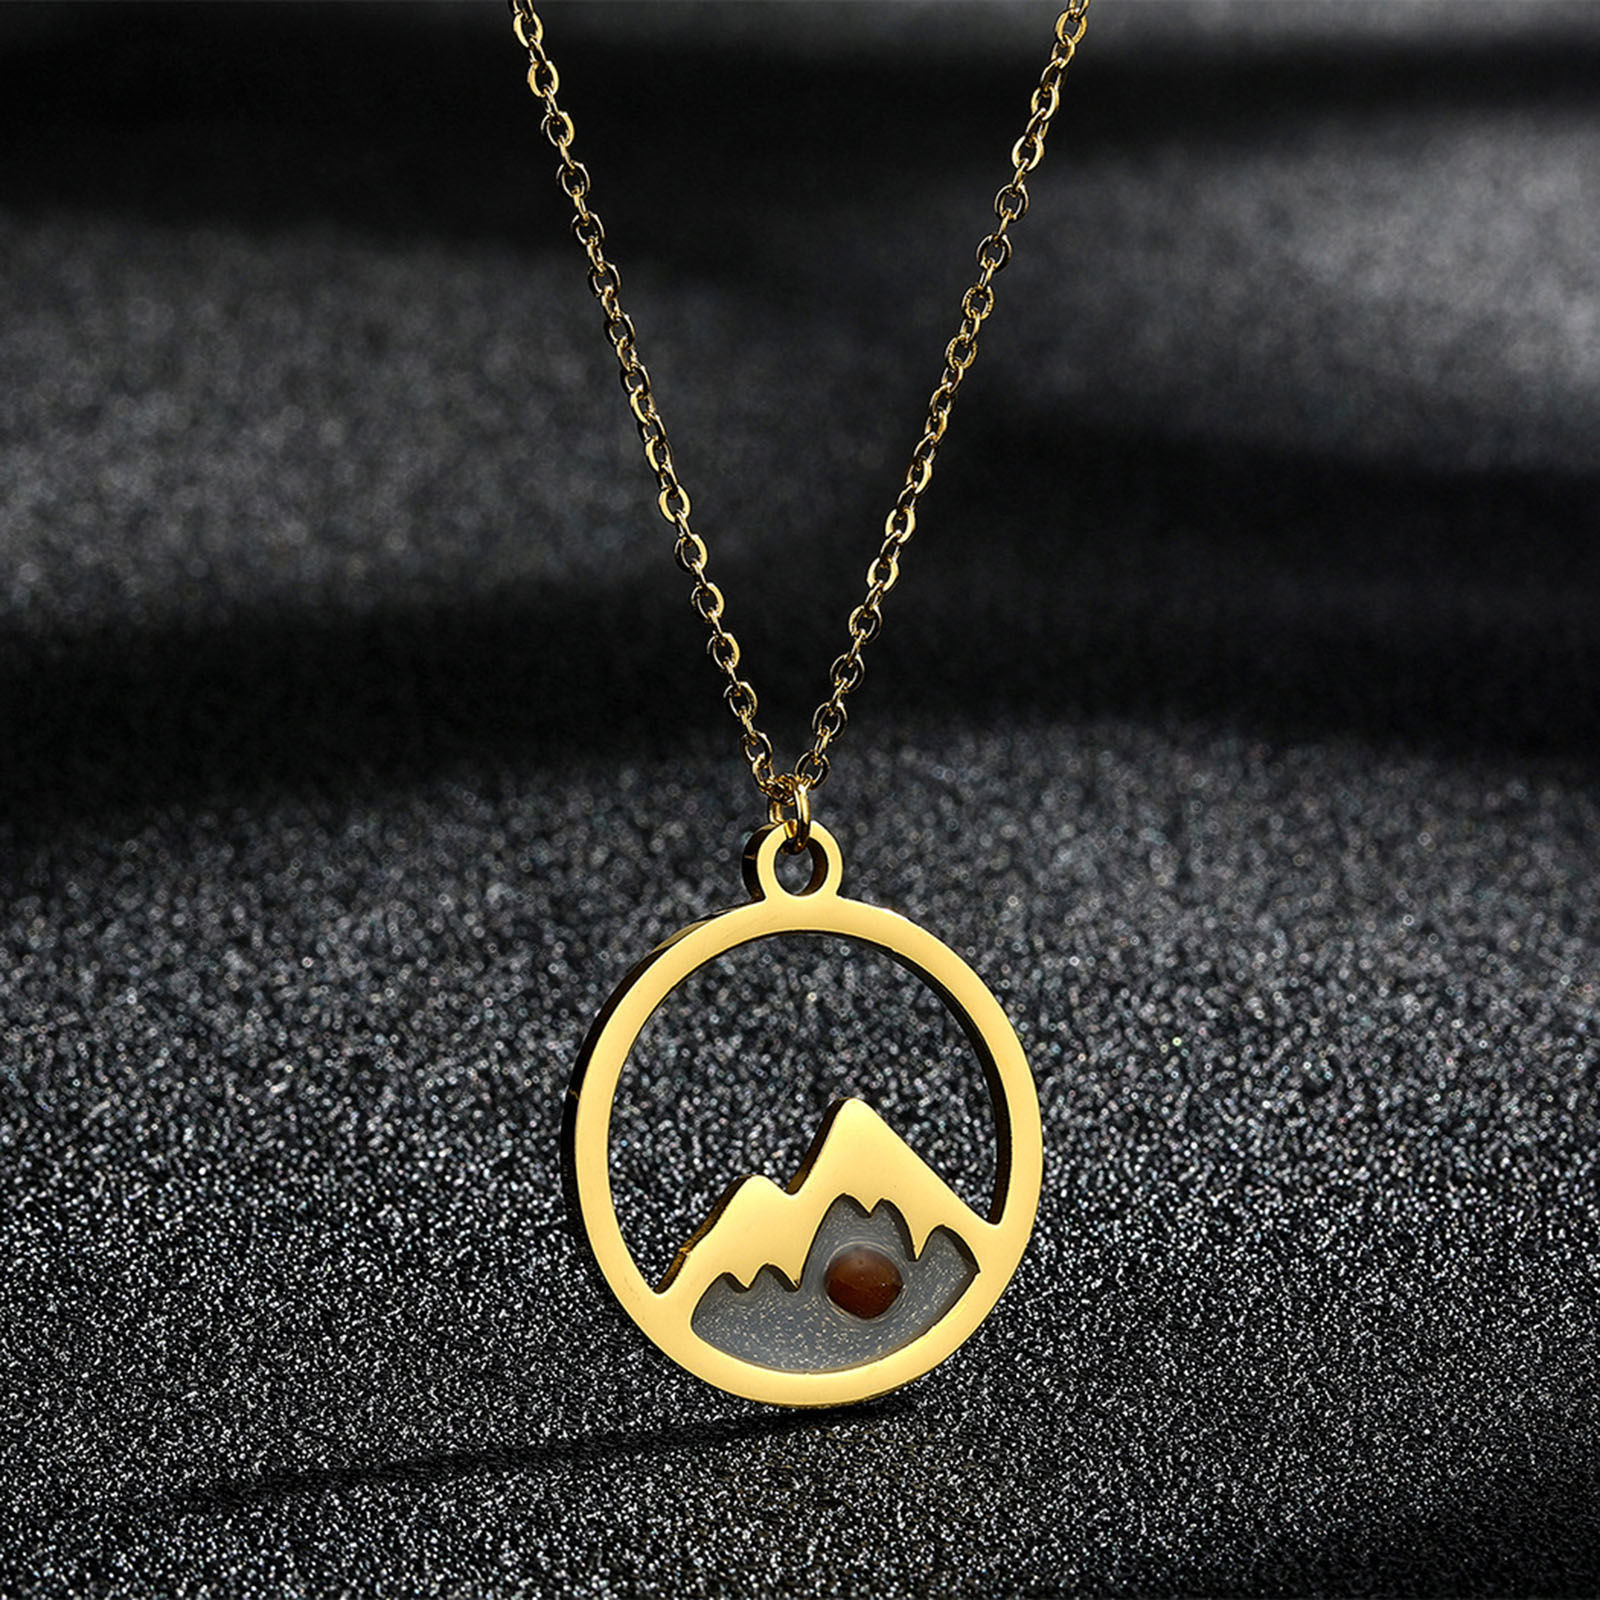 Picture of Creativity Mustard Seed 316 Stainless Steel Necklace Gold Plated Round Mountain 45cm(17 6/8") long, 1 Piece